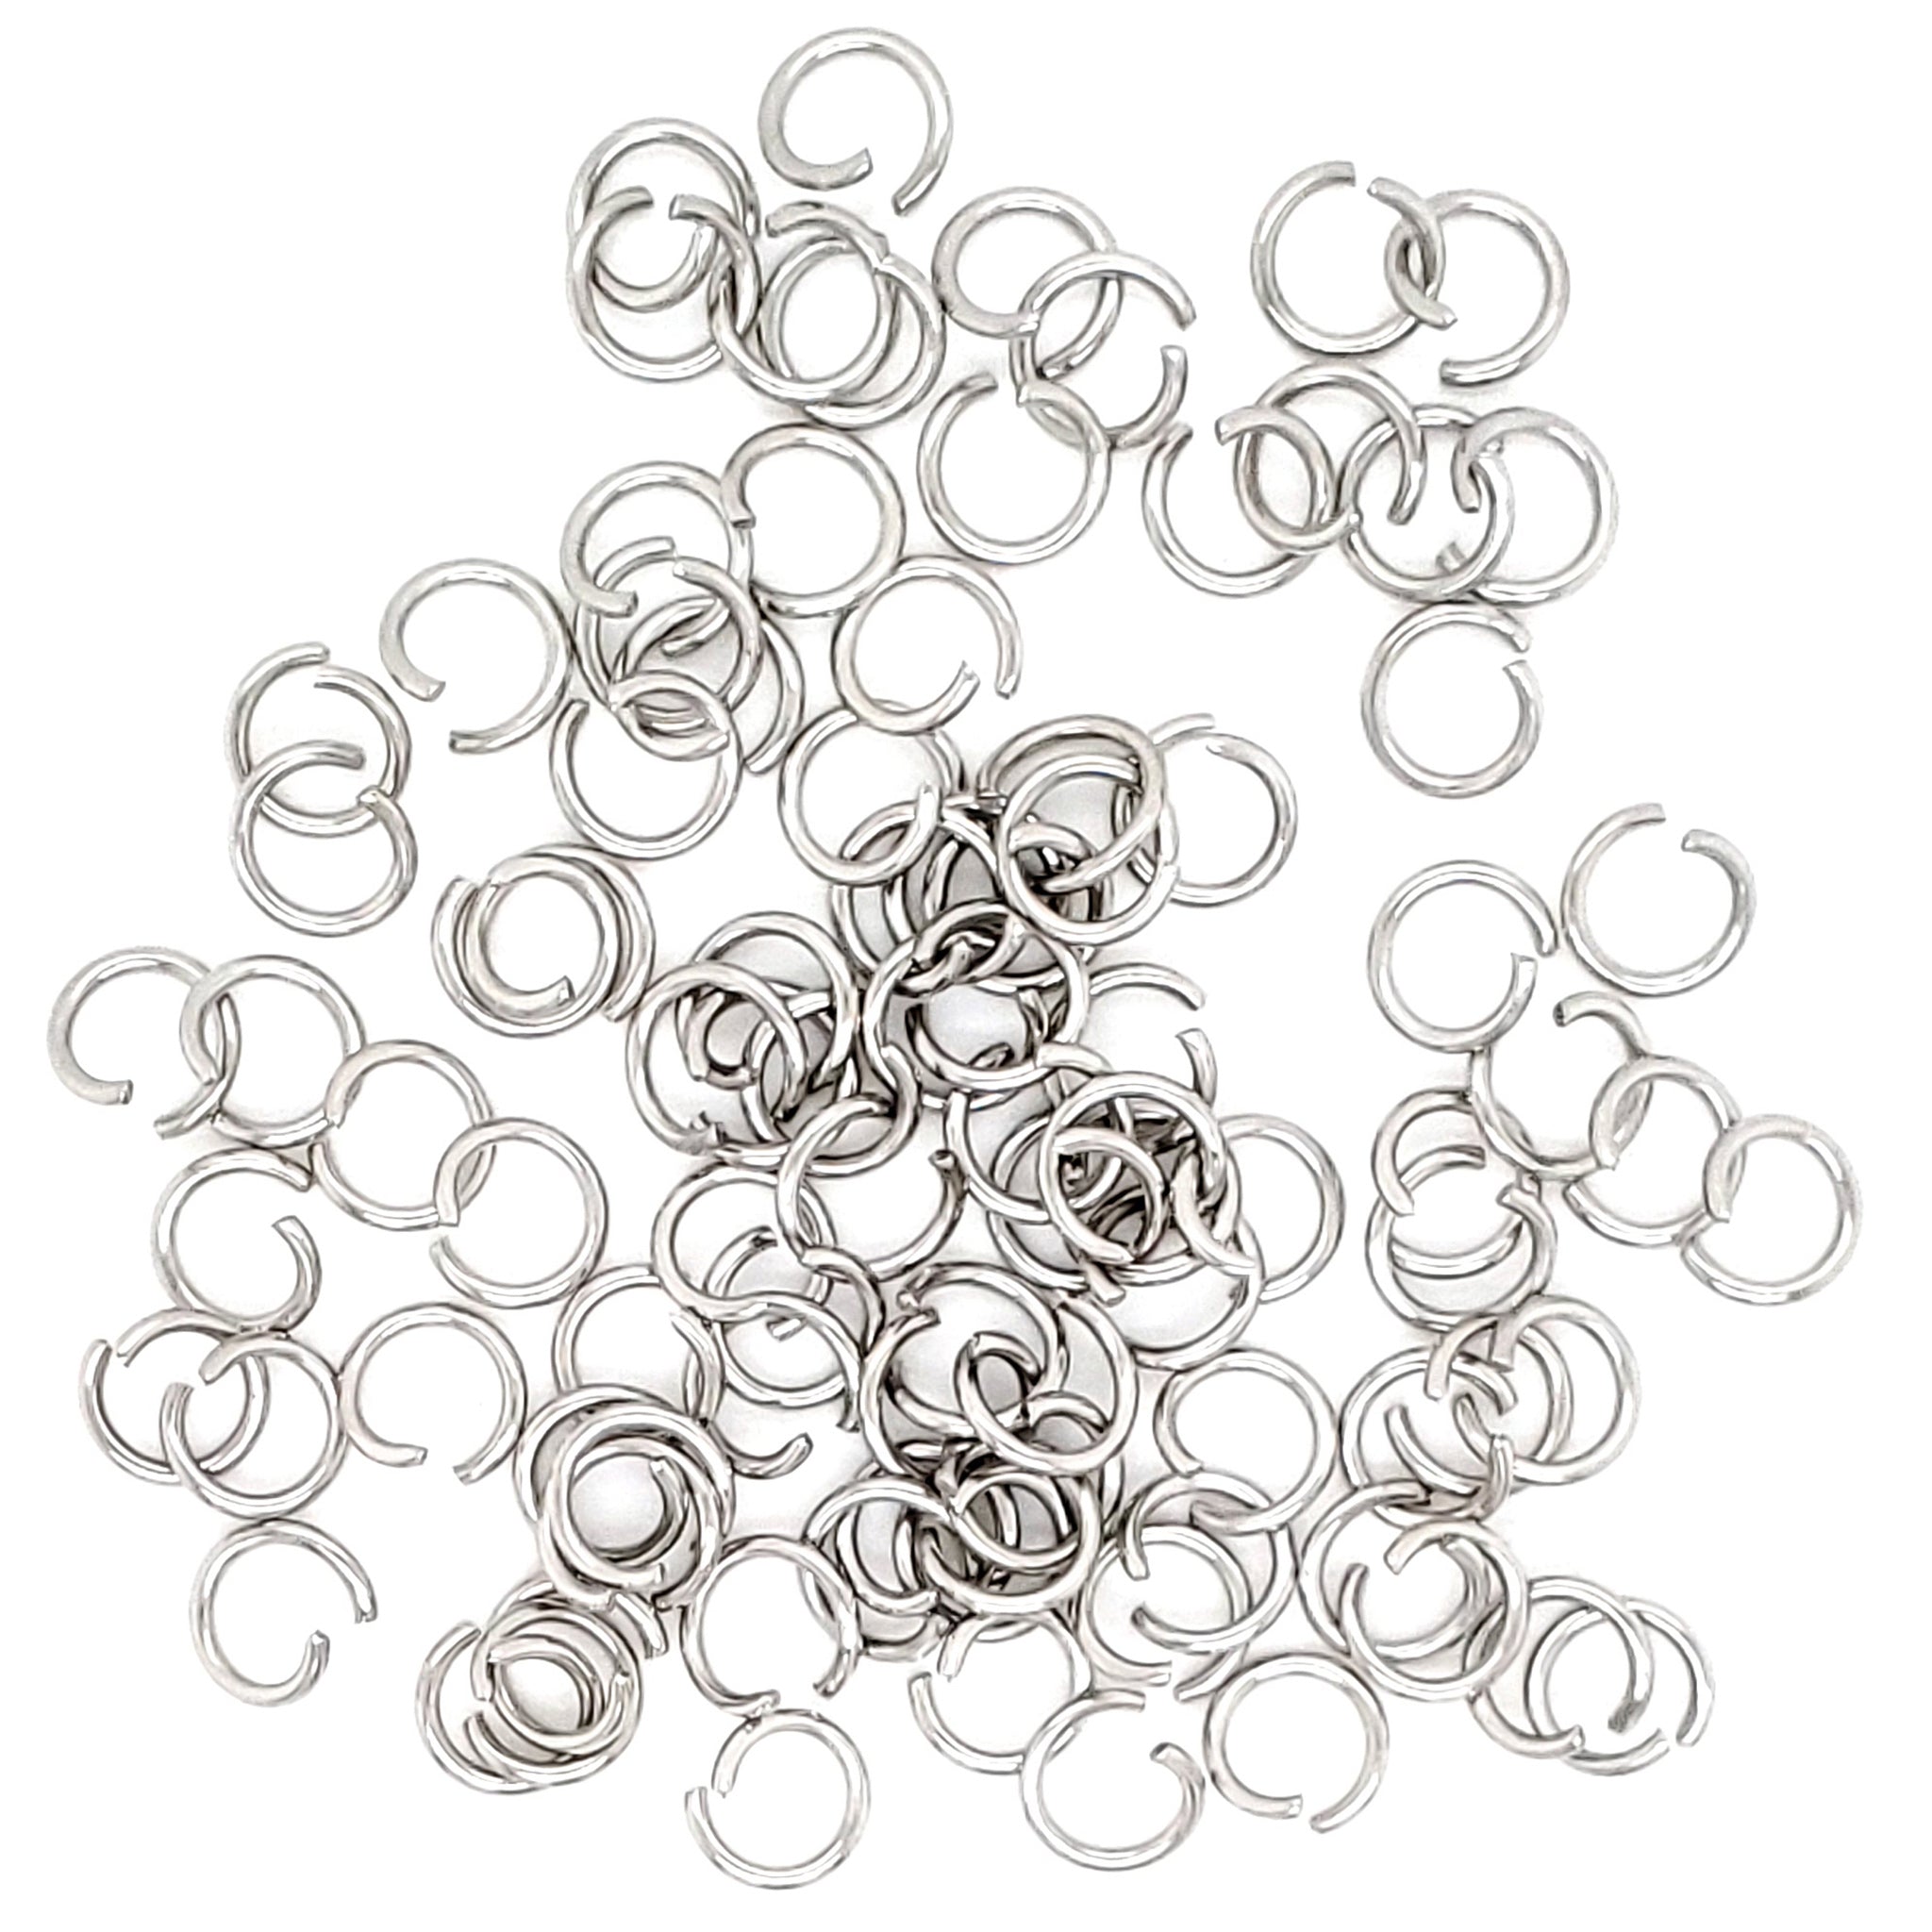 Necklaces Stainless Steel Saw Cut Jump Rings 100 Pk Necklaces Enc0003 22g / 4mm Wholesale Jewelry Website 4mm Unisex